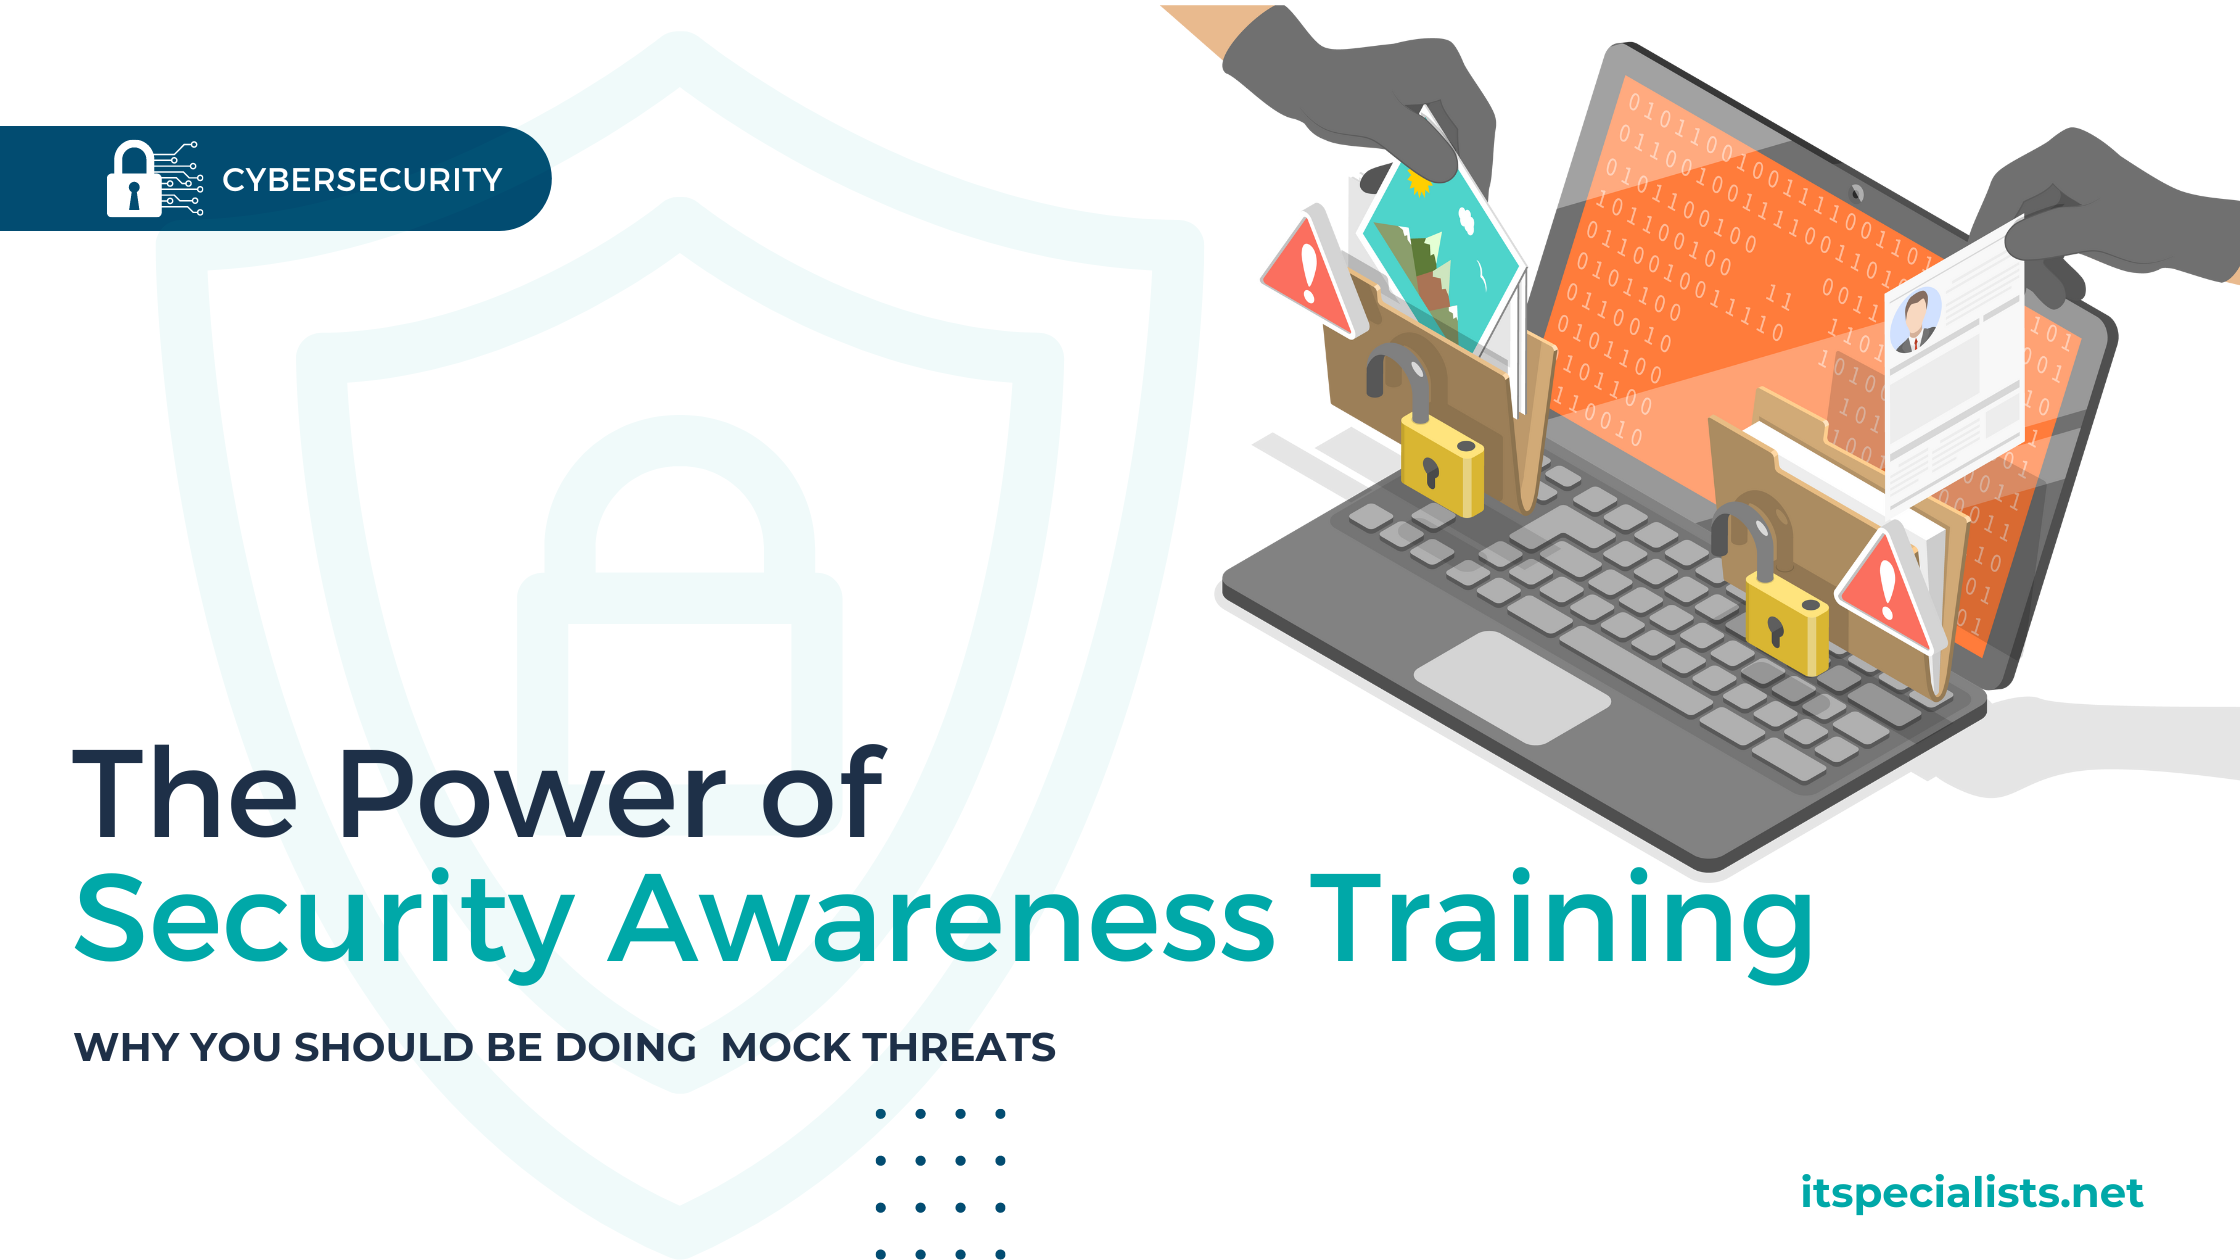 The Power of Security Awareness Training